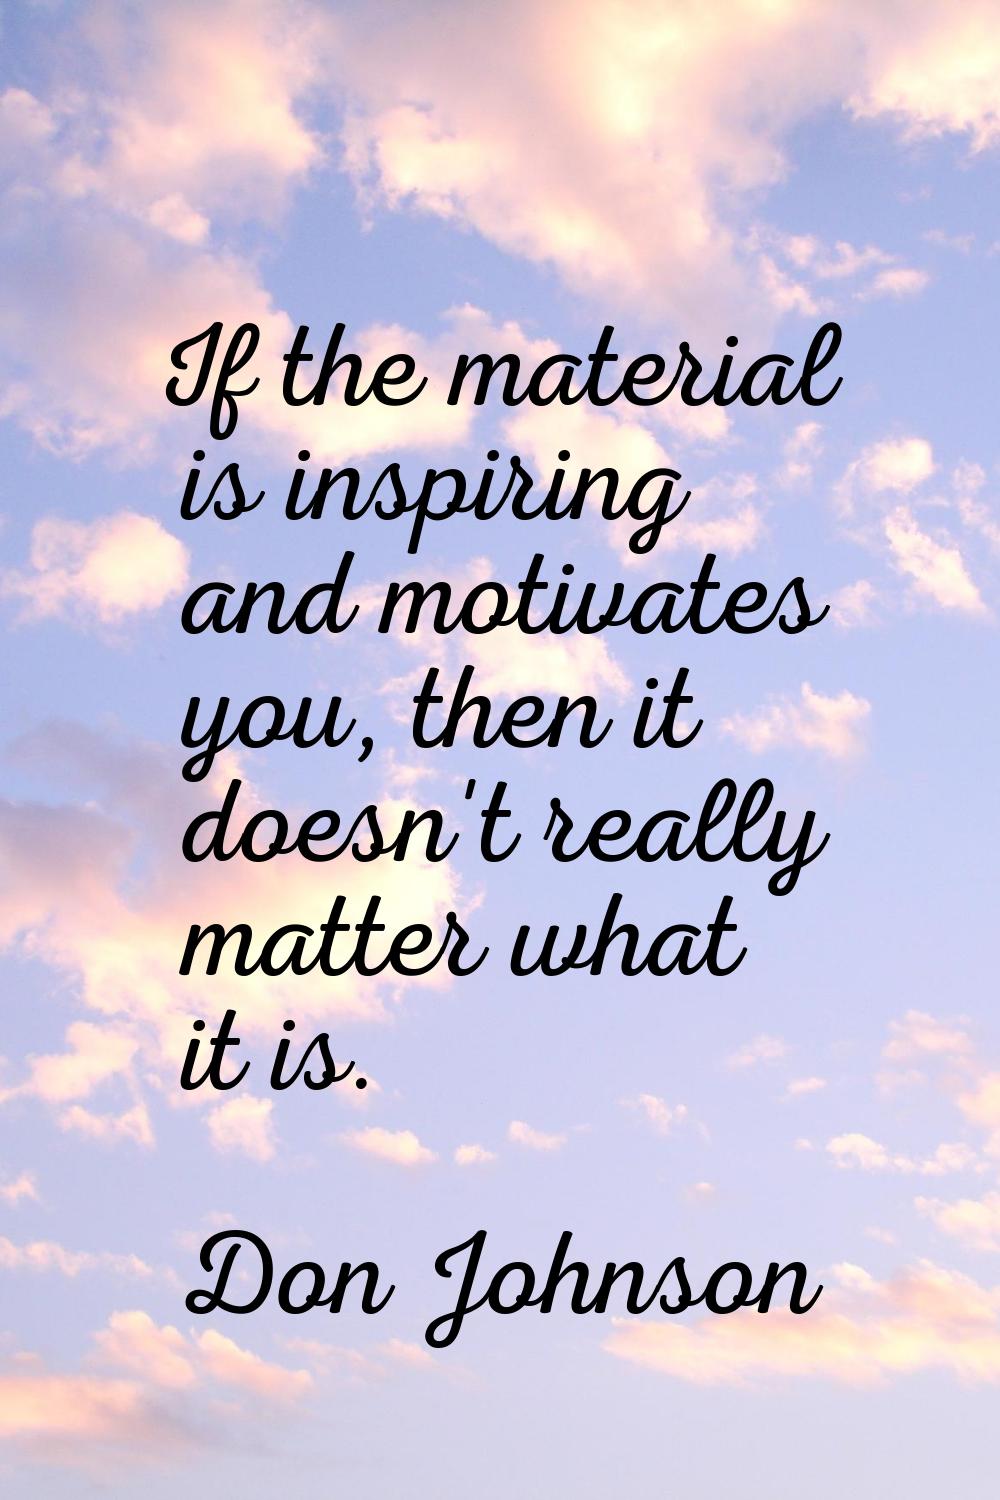 If the material is inspiring and motivates you, then it doesn't really matter what it is.